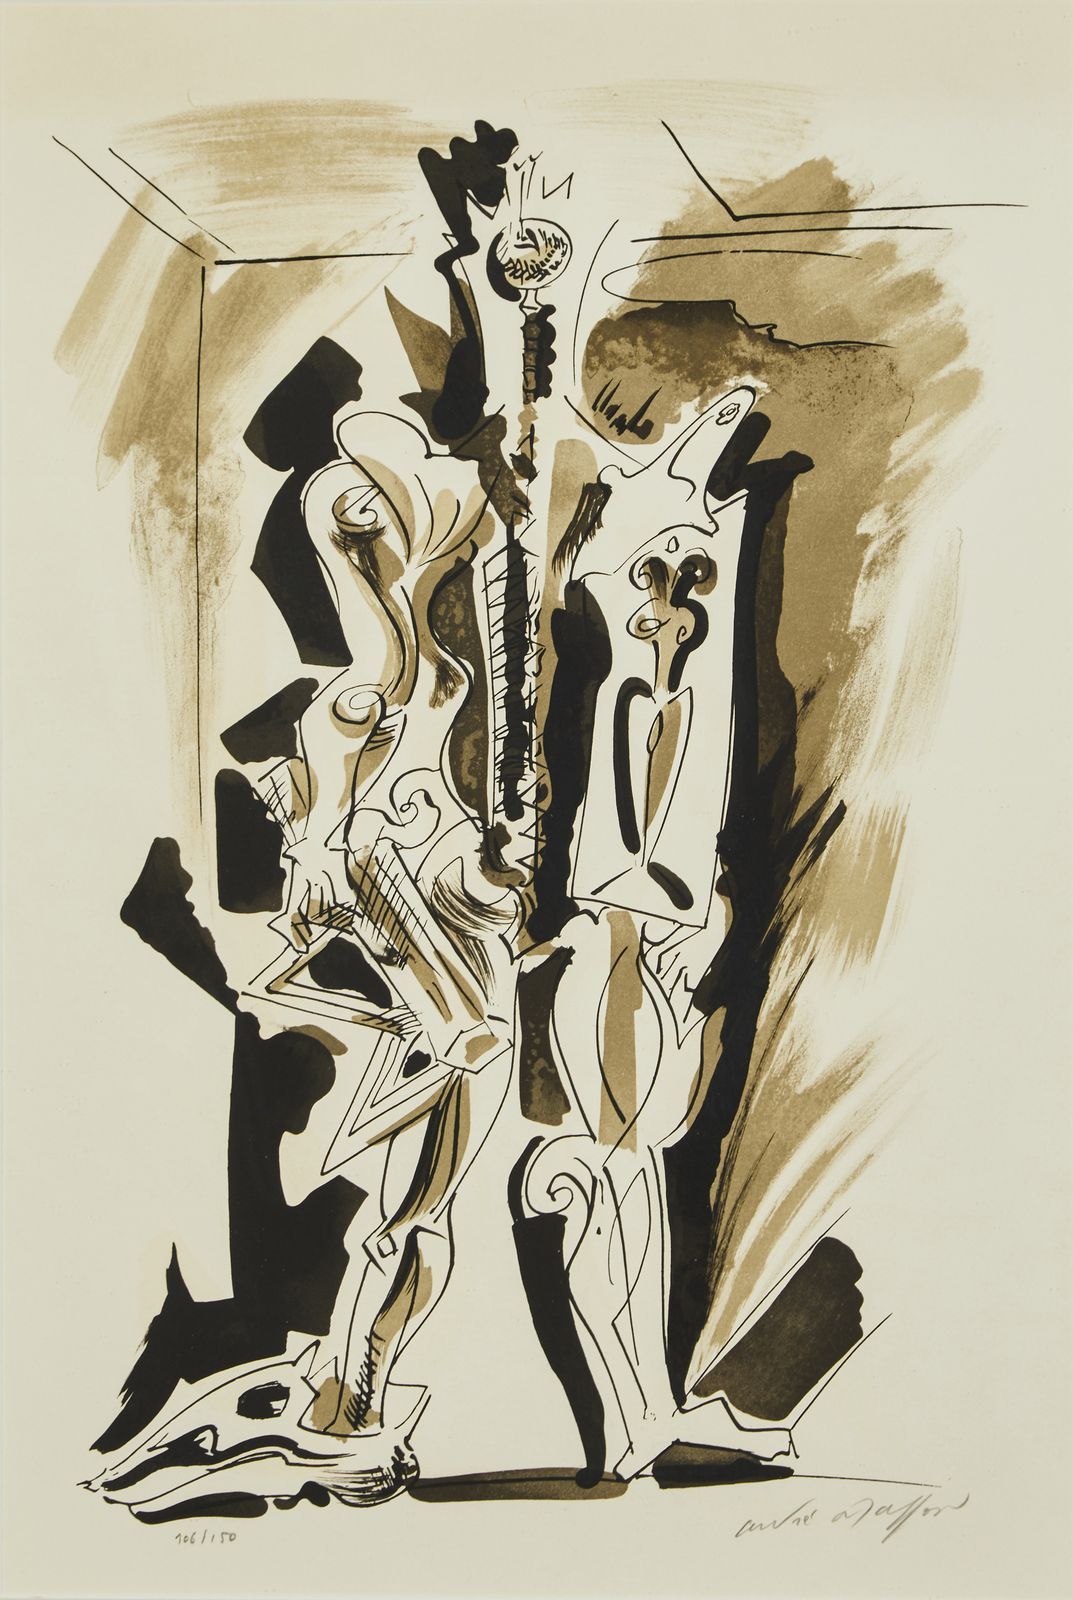 Null 9 André MASSON (1896-1987)

Hommage à Dorothea Tanning, 1977

Lithographie &hellip;